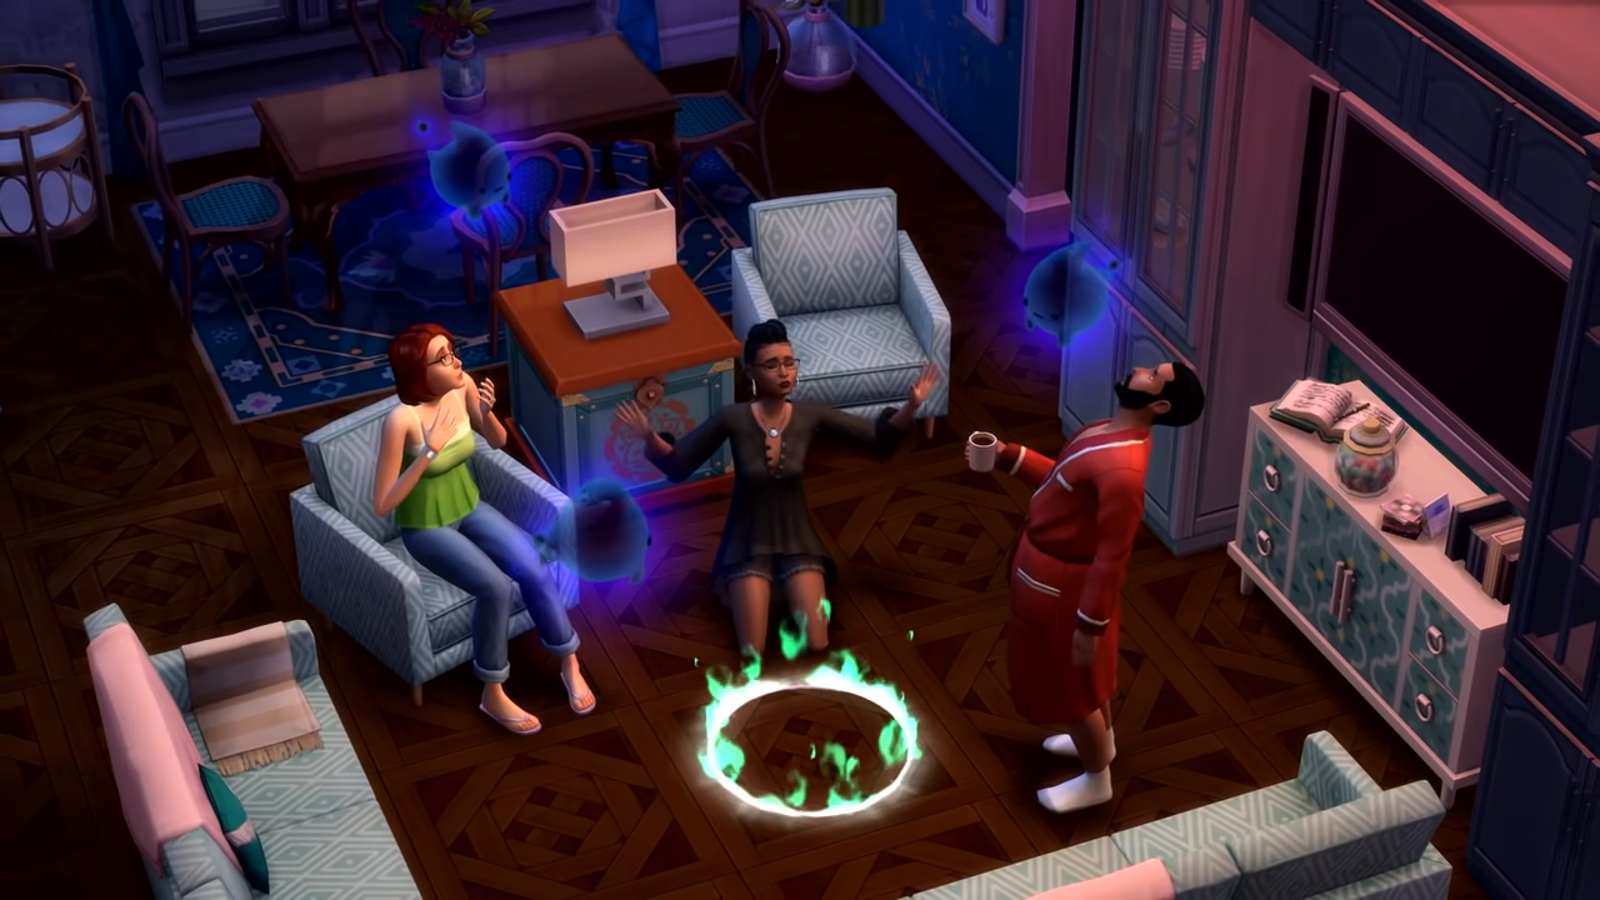 How To Find Or Build A Haunted House In The Sims 4